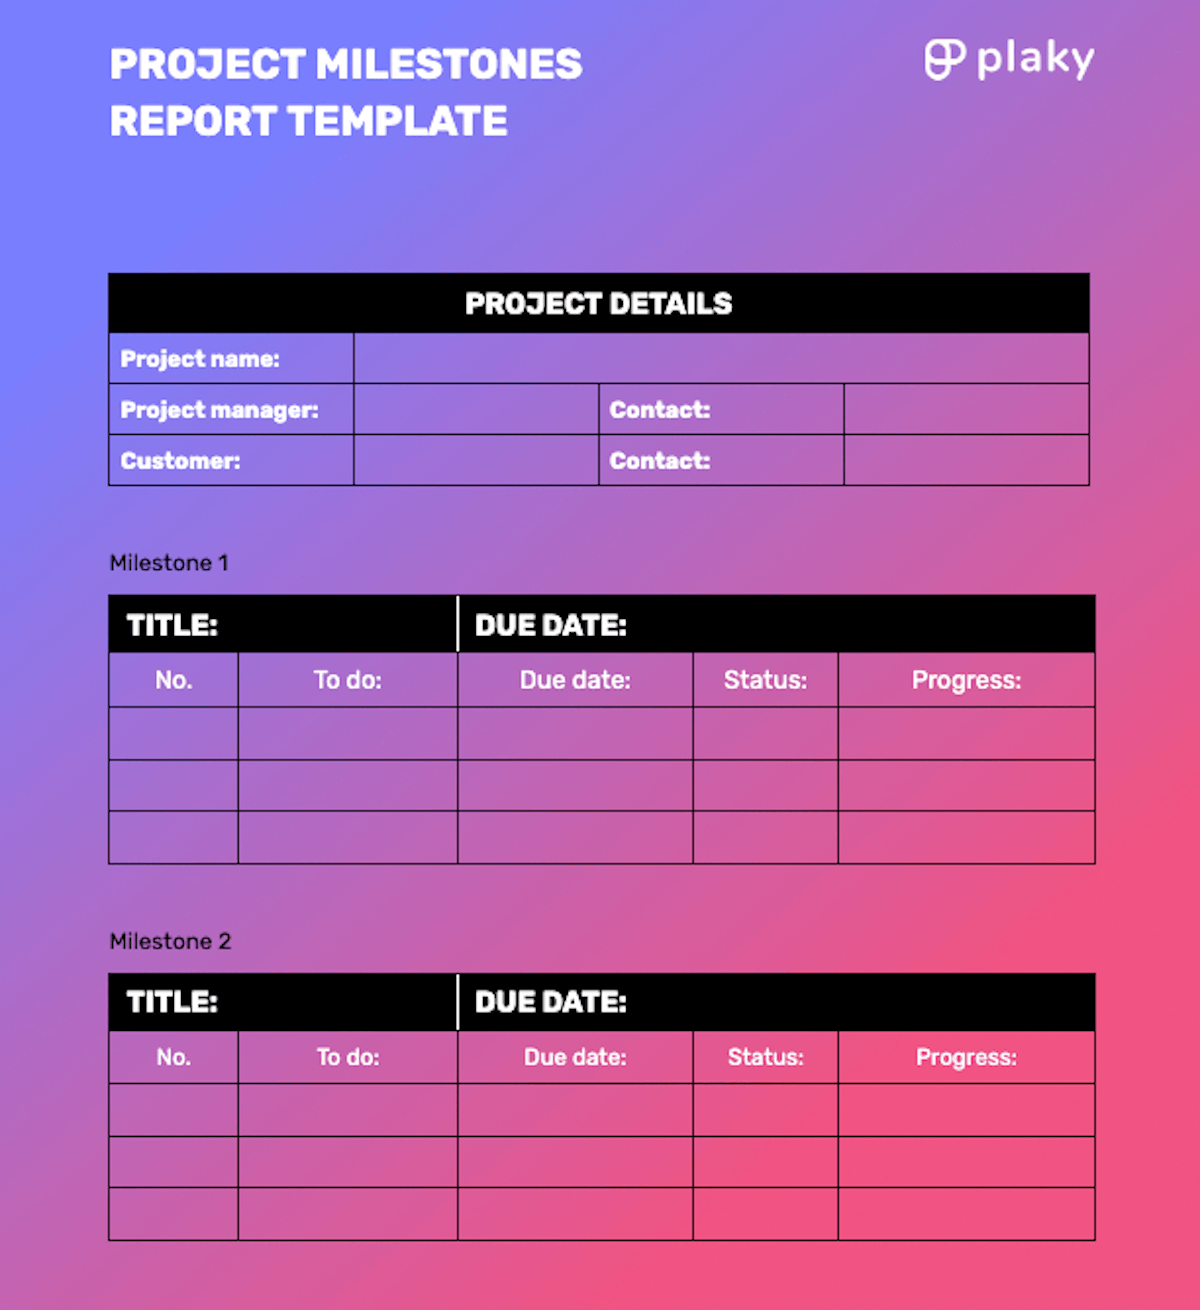 Example of a project milestones report template